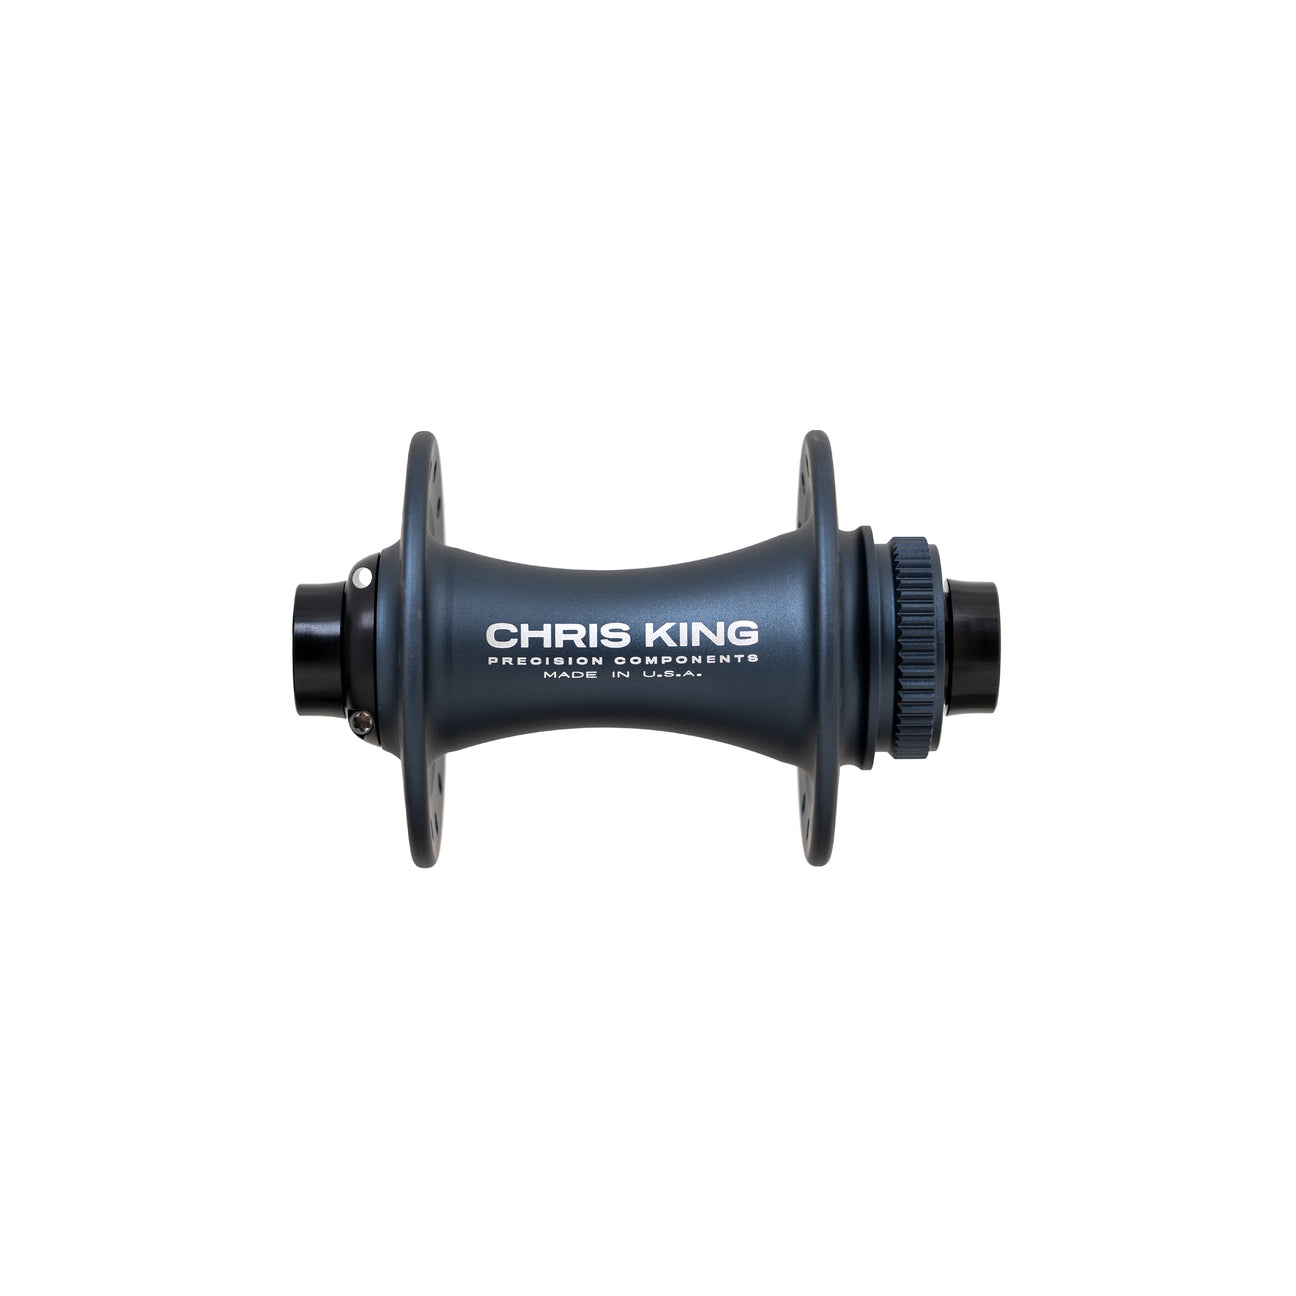 Chris King boost front hub in midnight